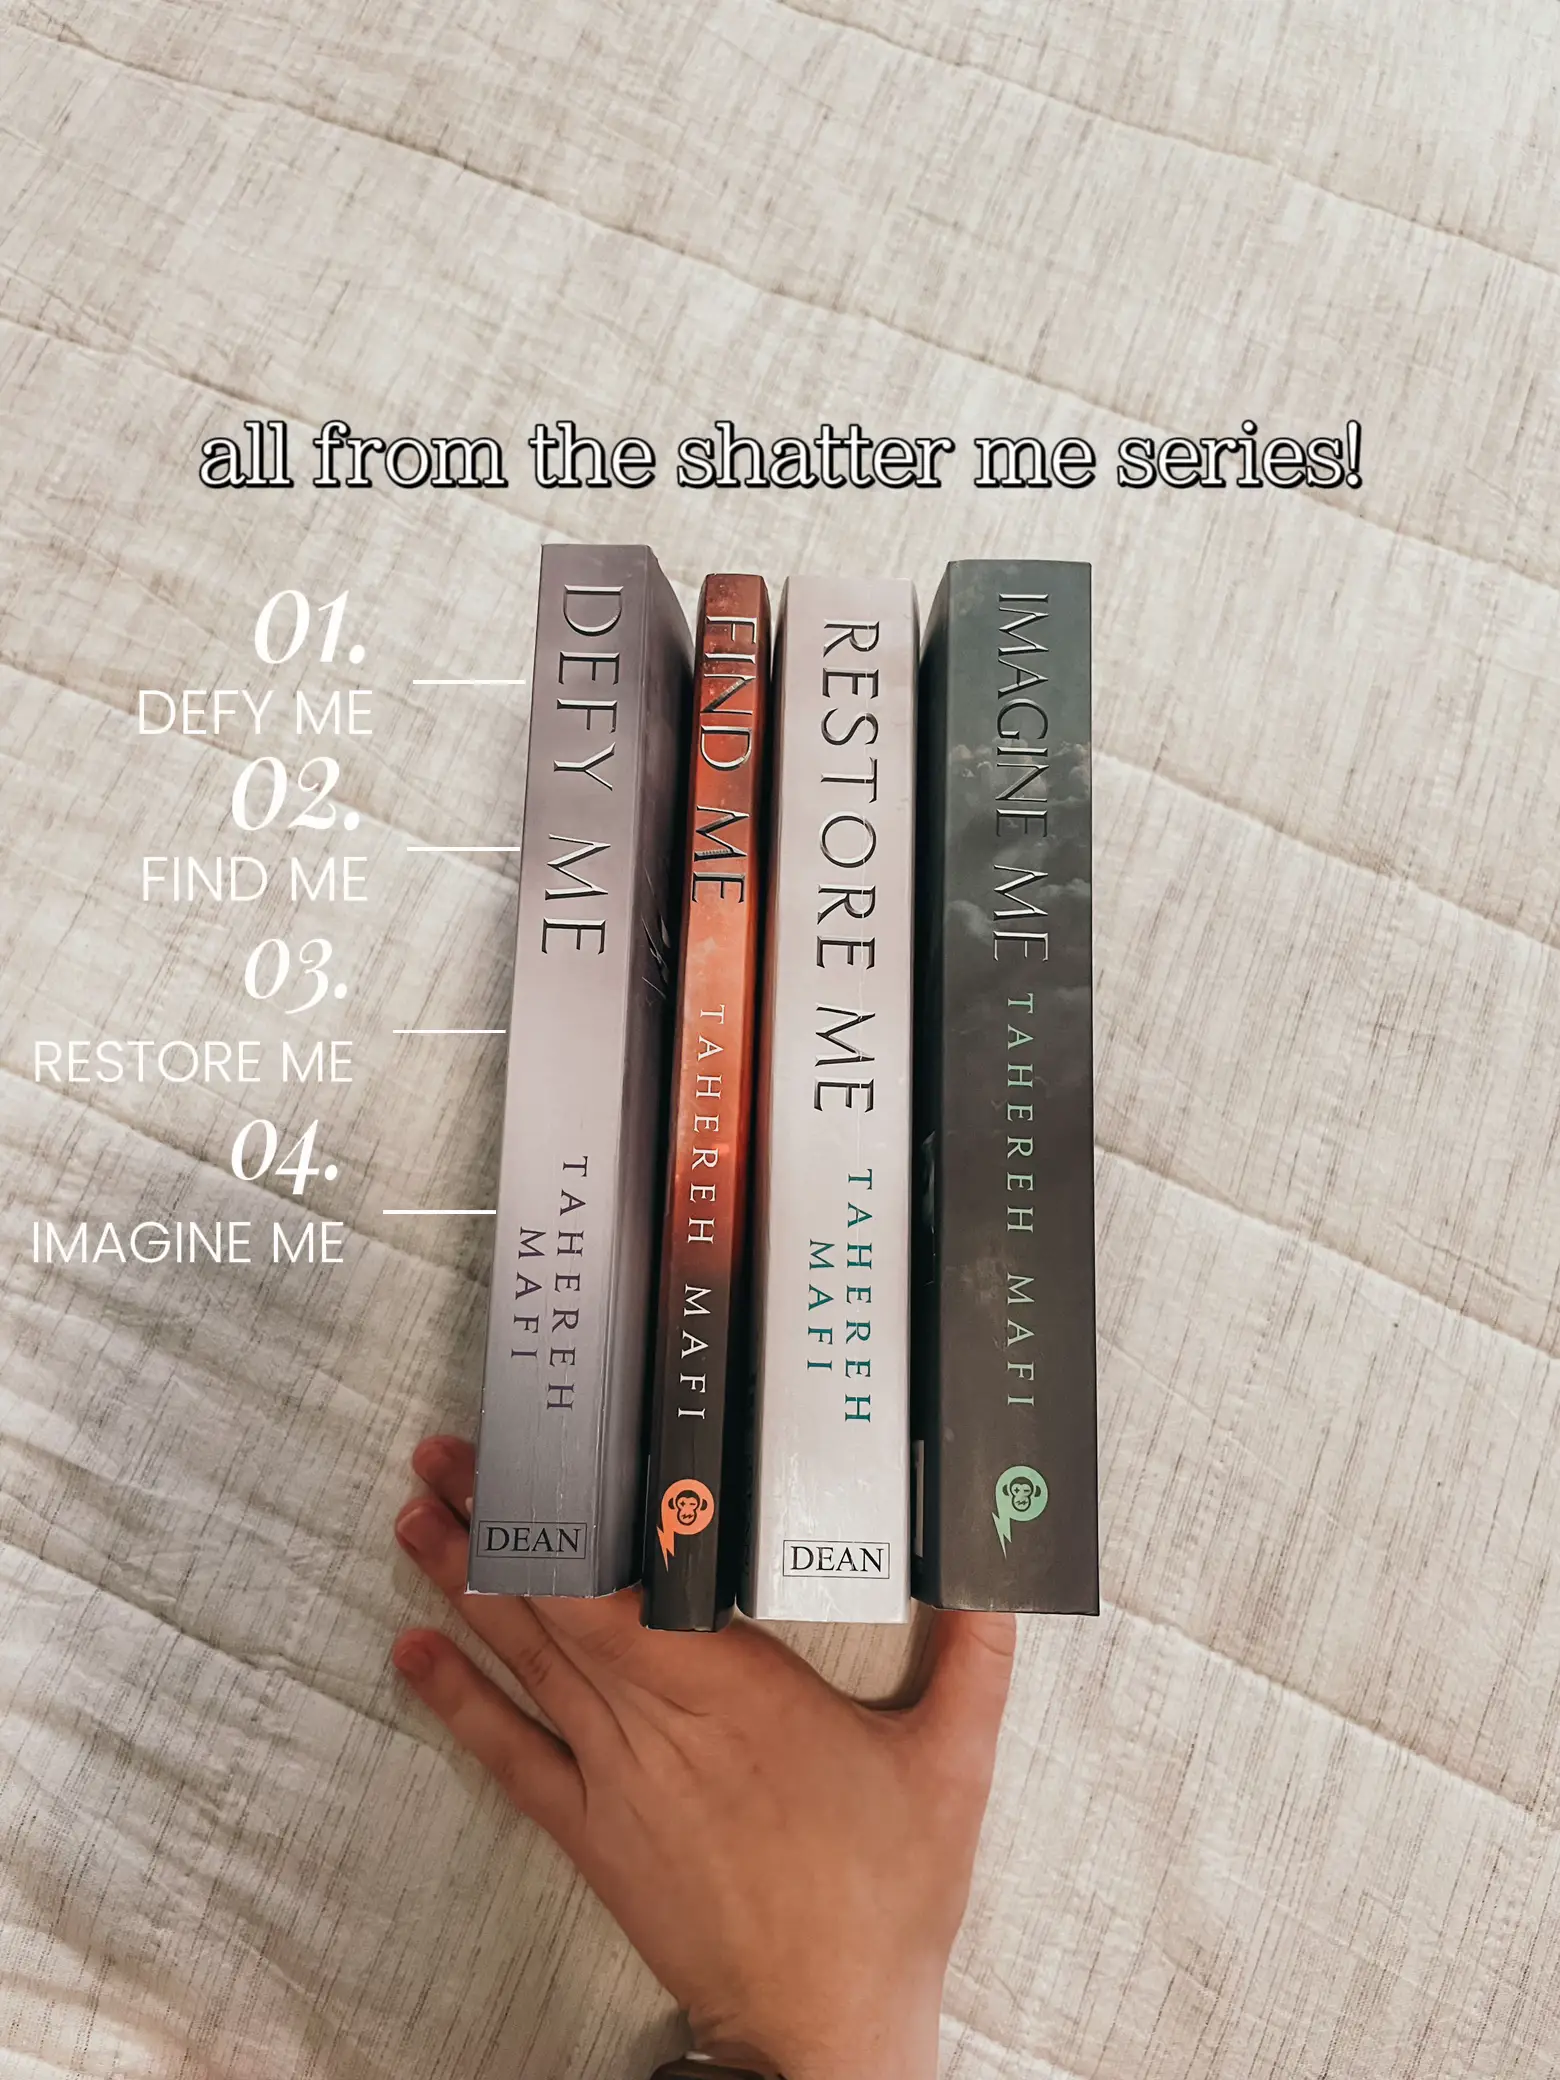 Shatter Me Series 4 Book Collection Set By Tahereh Mafi - Tall Tales Books